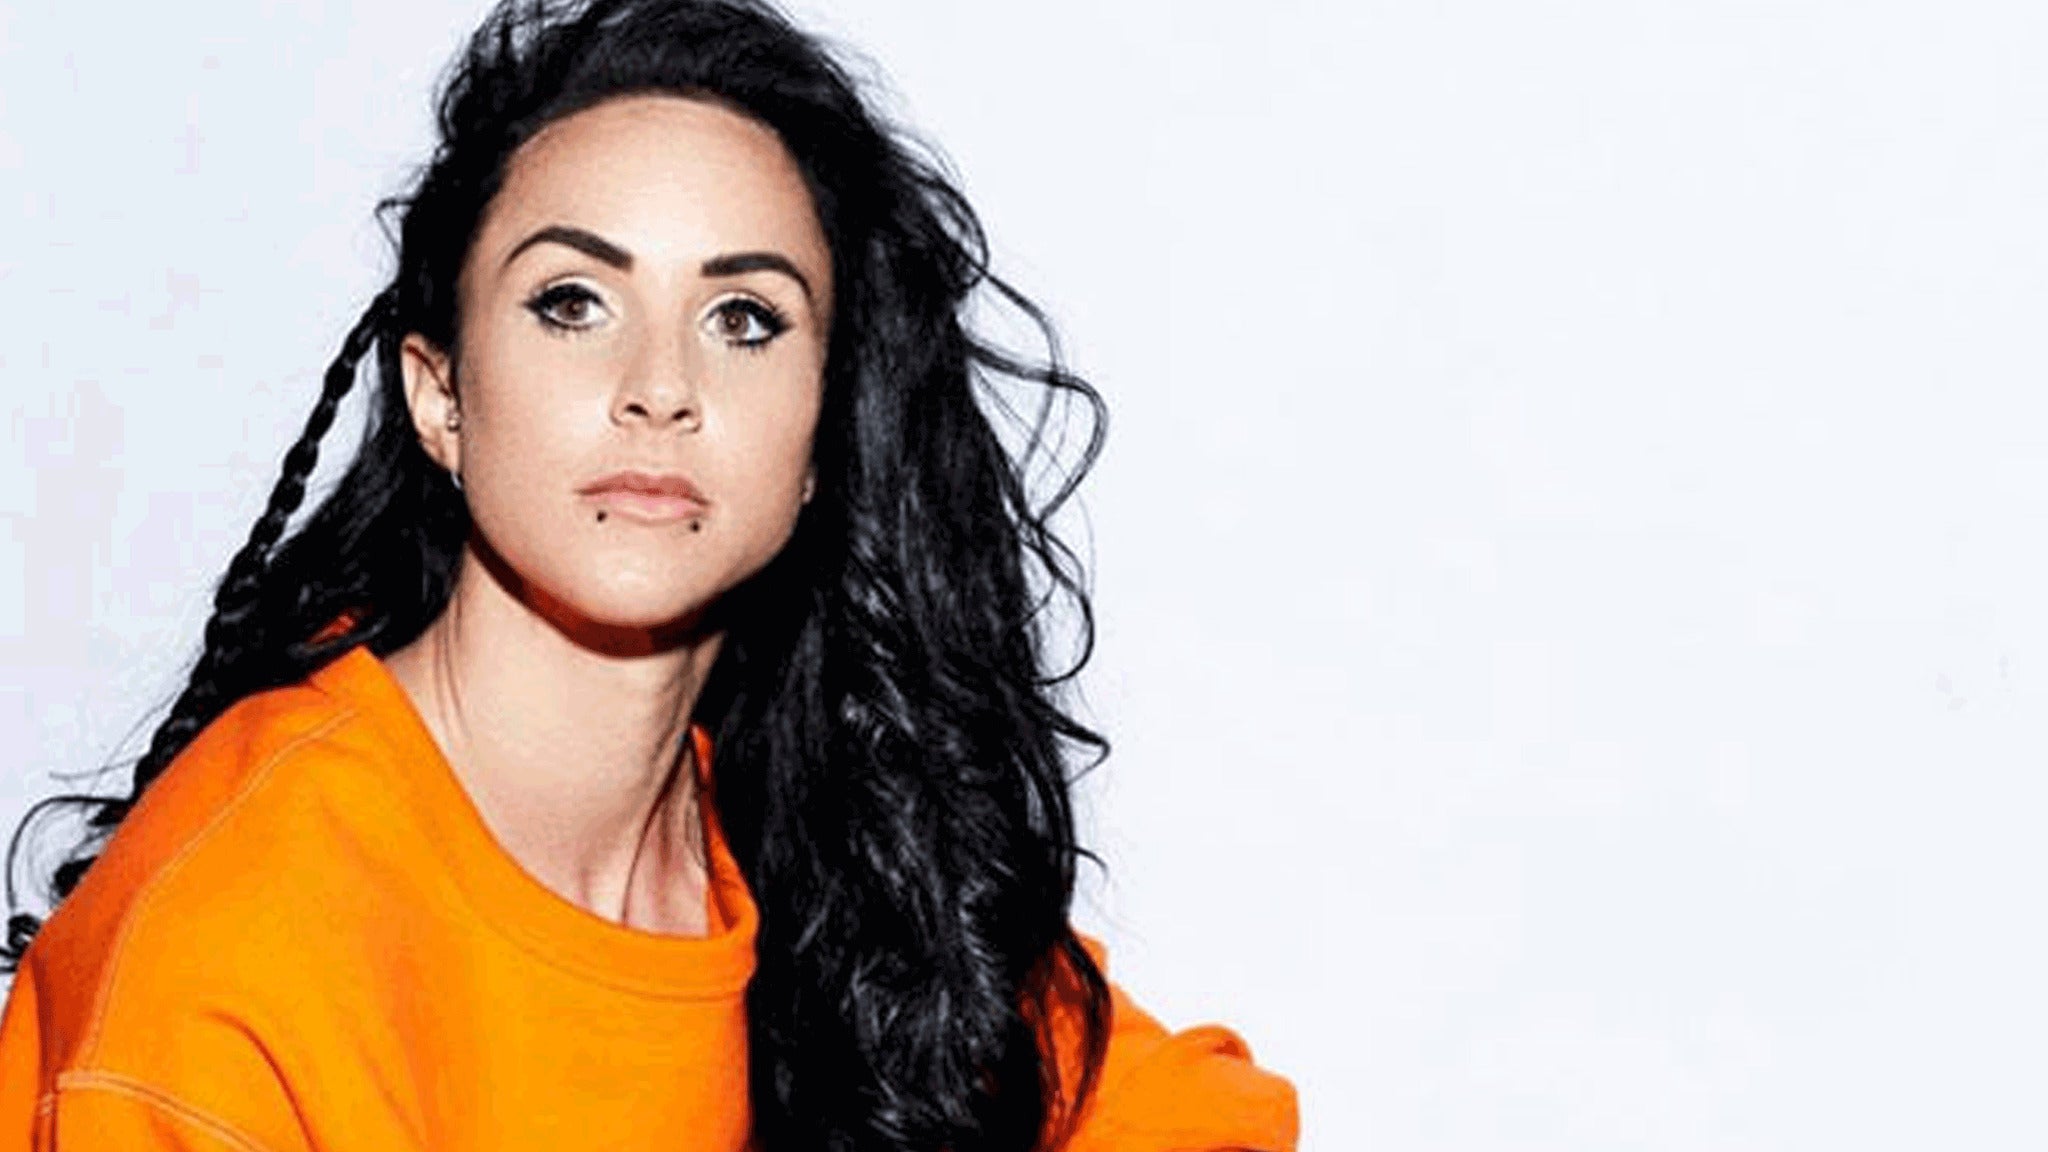 Image used with permission from Ticketmaster | Hannah Wants tickets